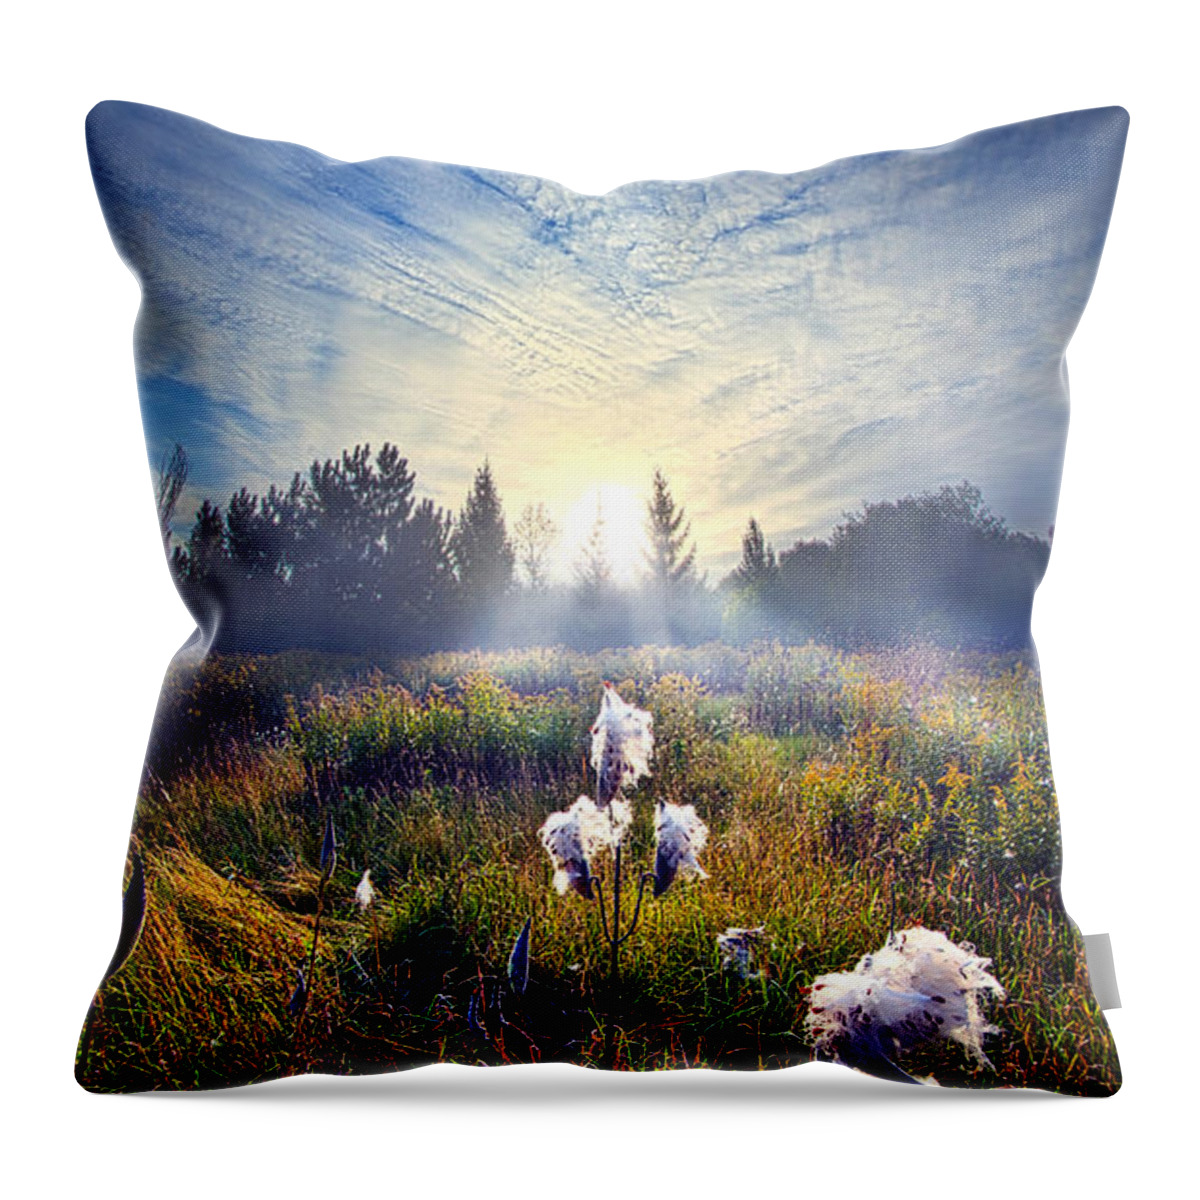 Milkweed Throw Pillow featuring the photograph There are Times I Fear I Lose Myself by Phil Koch